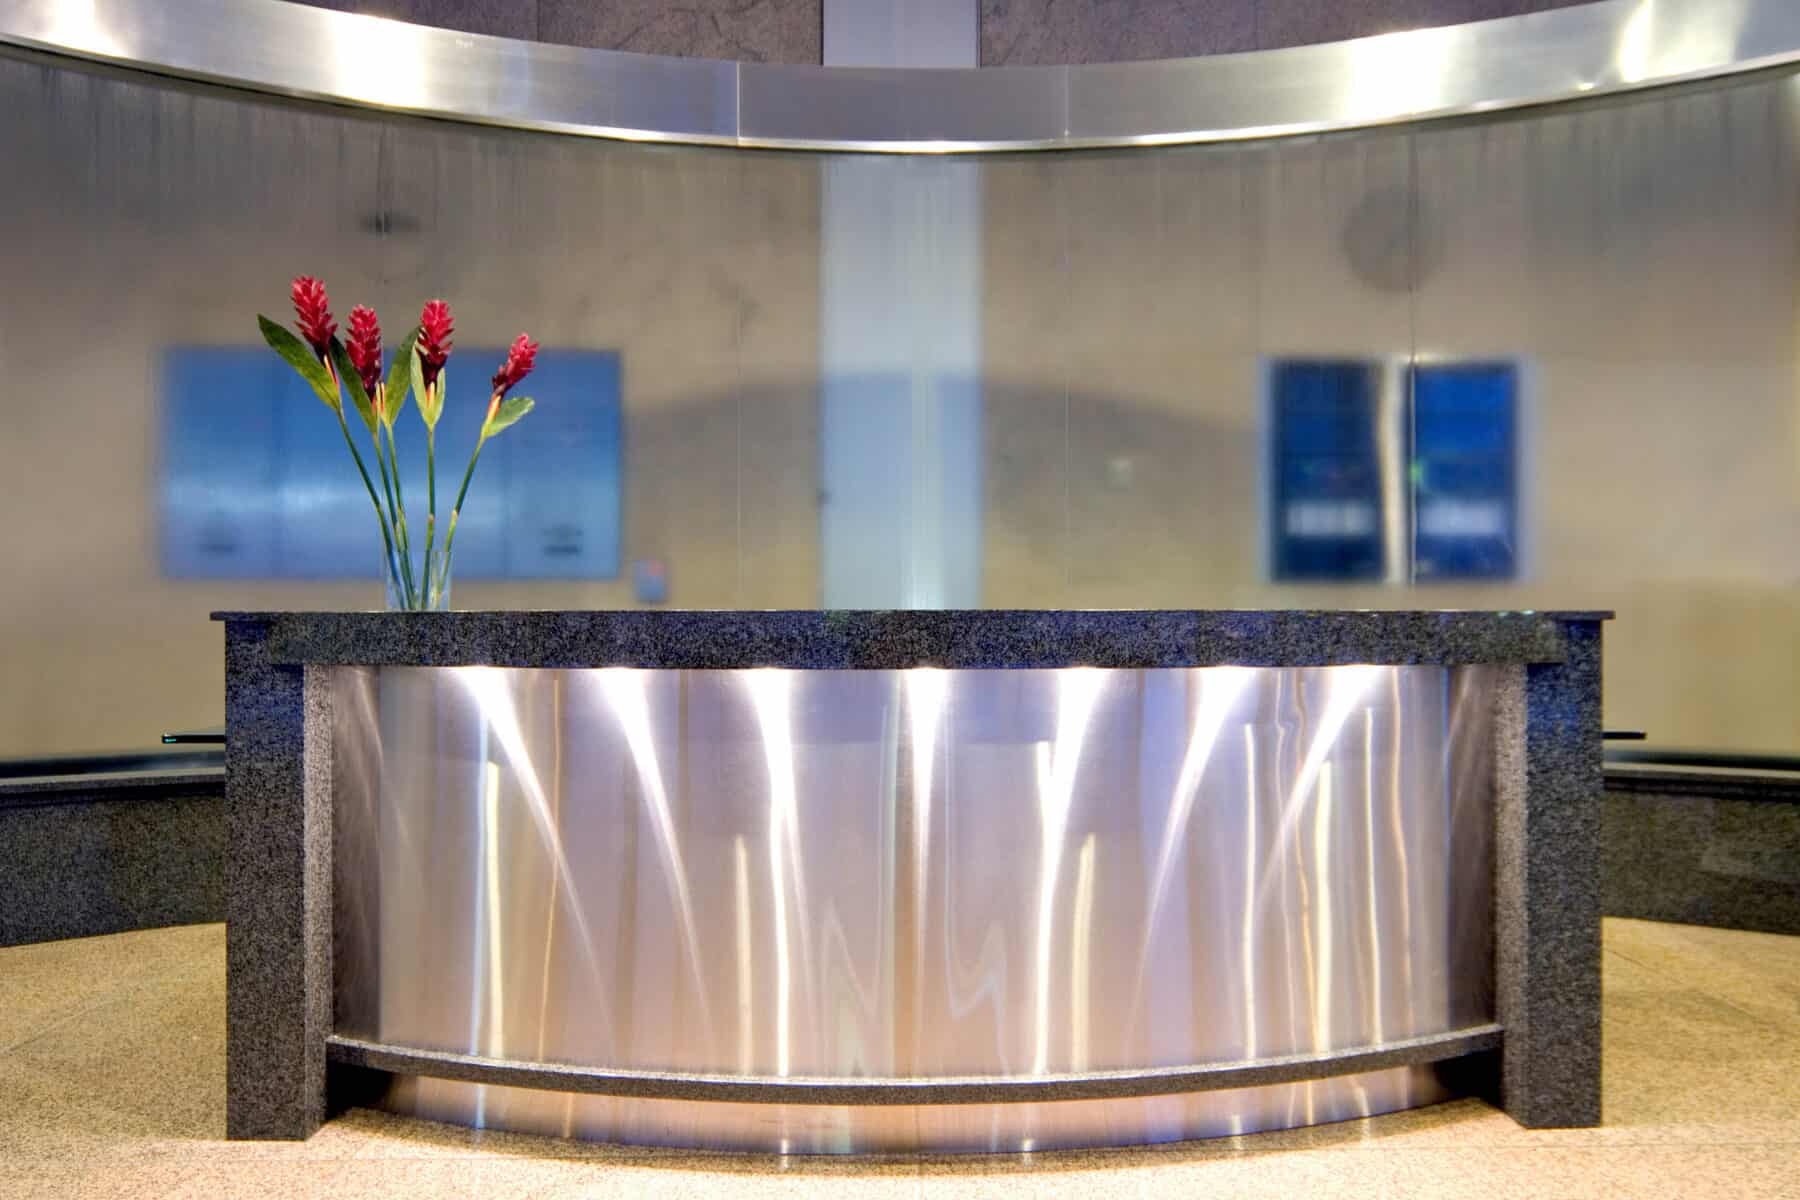 Custom Fabrication of Architectural Stainless Steel Metal, Granite and Glass Curved Water Feature from Construction Specialty Projects by Commercial Builder & General Contractor Structural Enterprises